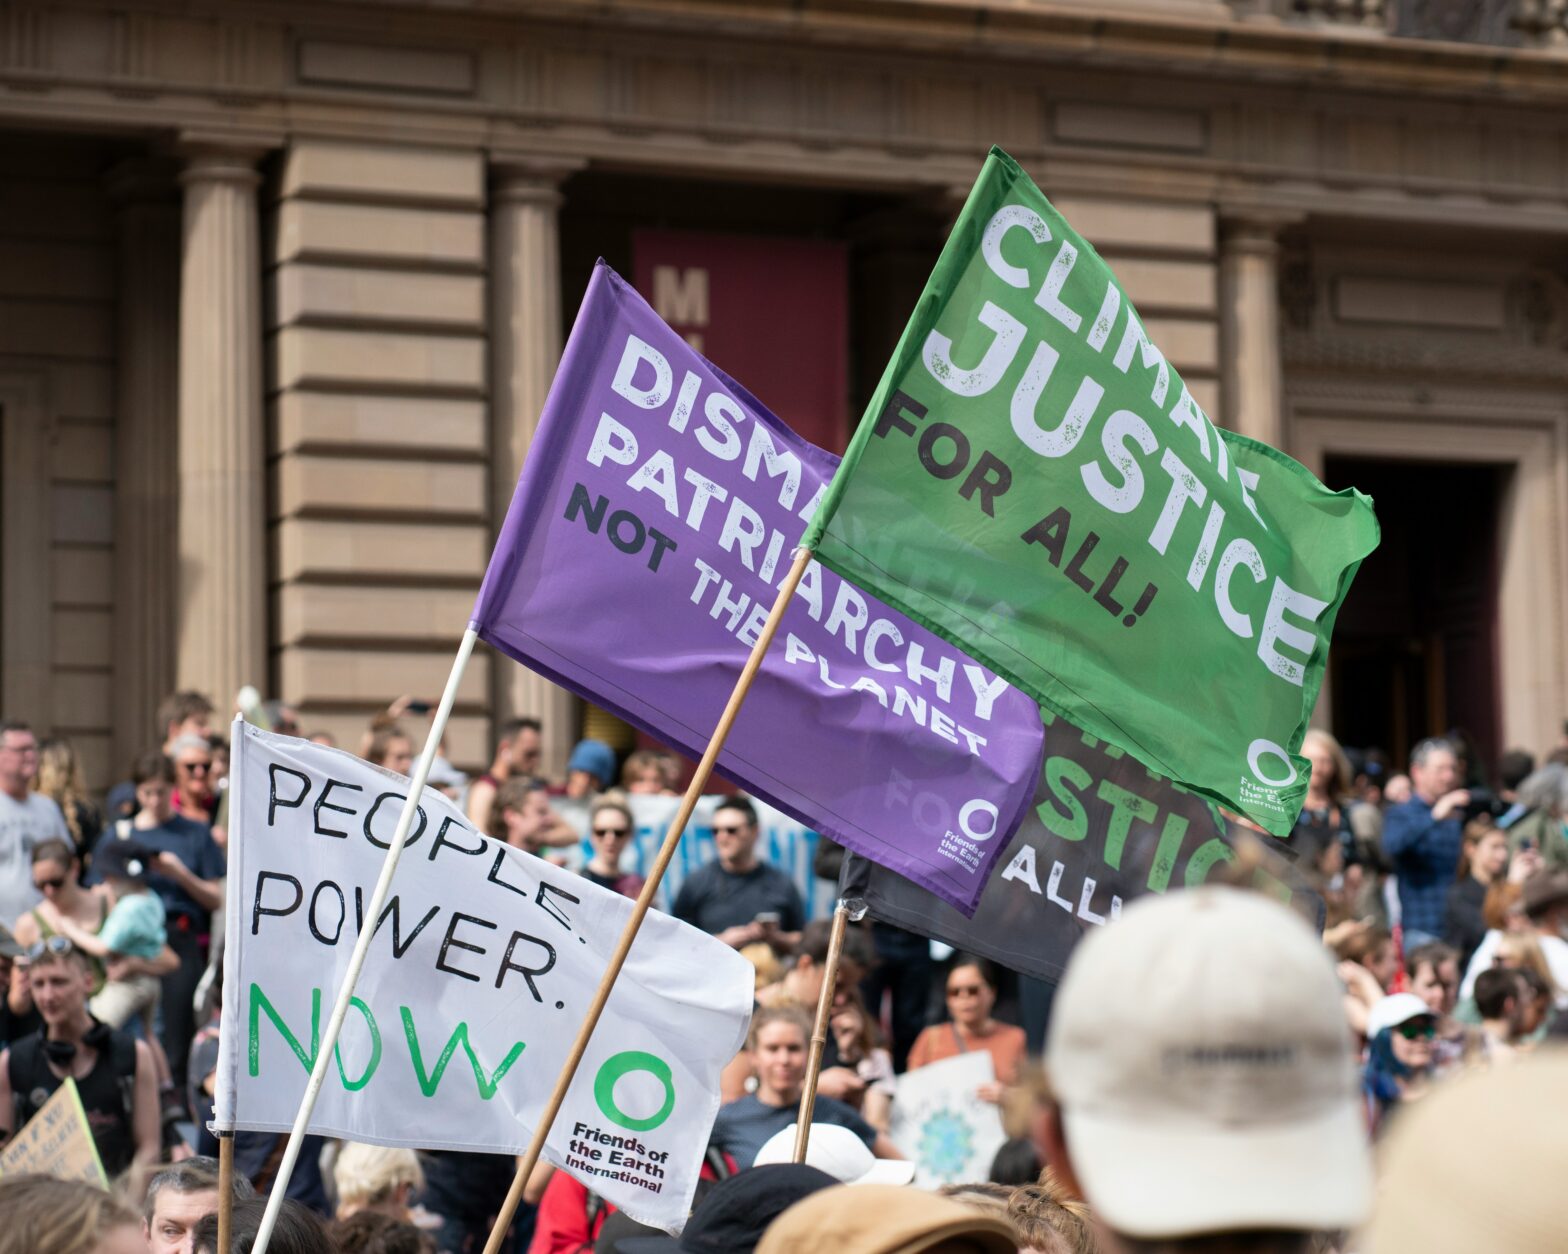 Protestors with banners bearing climate justice slogans outside a government building. Photo by Lawrence Makoona on https://unsplash.com/photos/a-group-of-people-holding-signs-in-front-of-a-building-o_OMiYzkJMI Unsplash